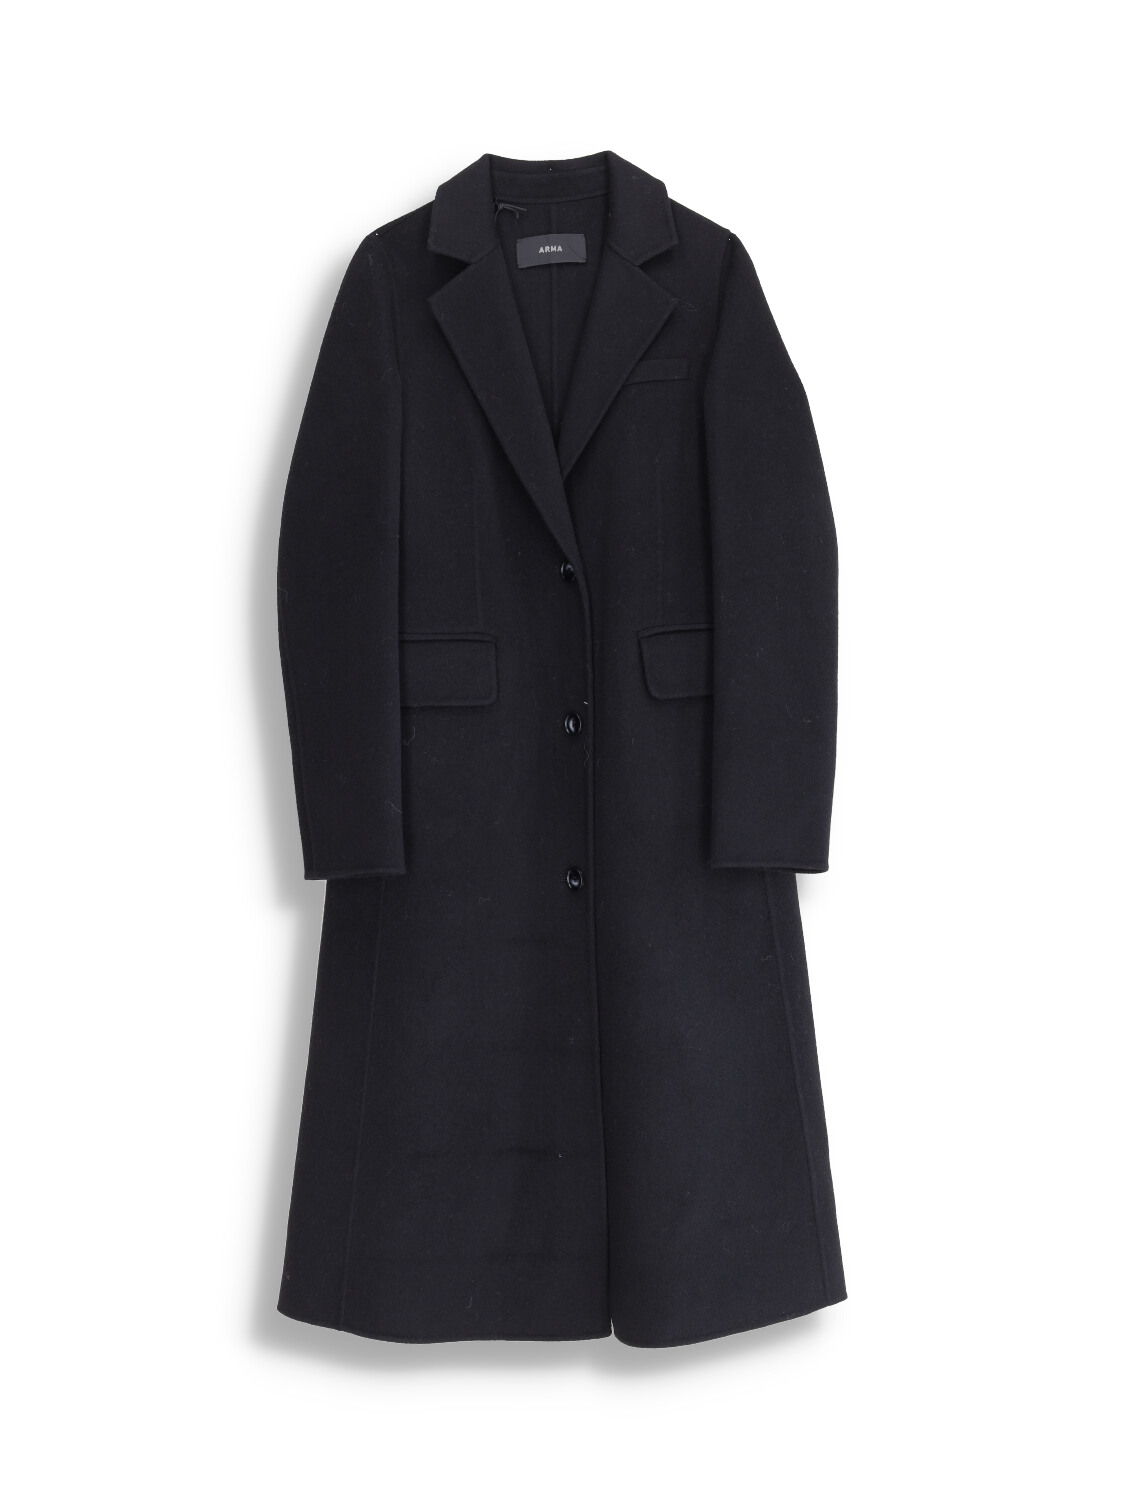 Sao Paulo - Classic Wool Button Front Coat